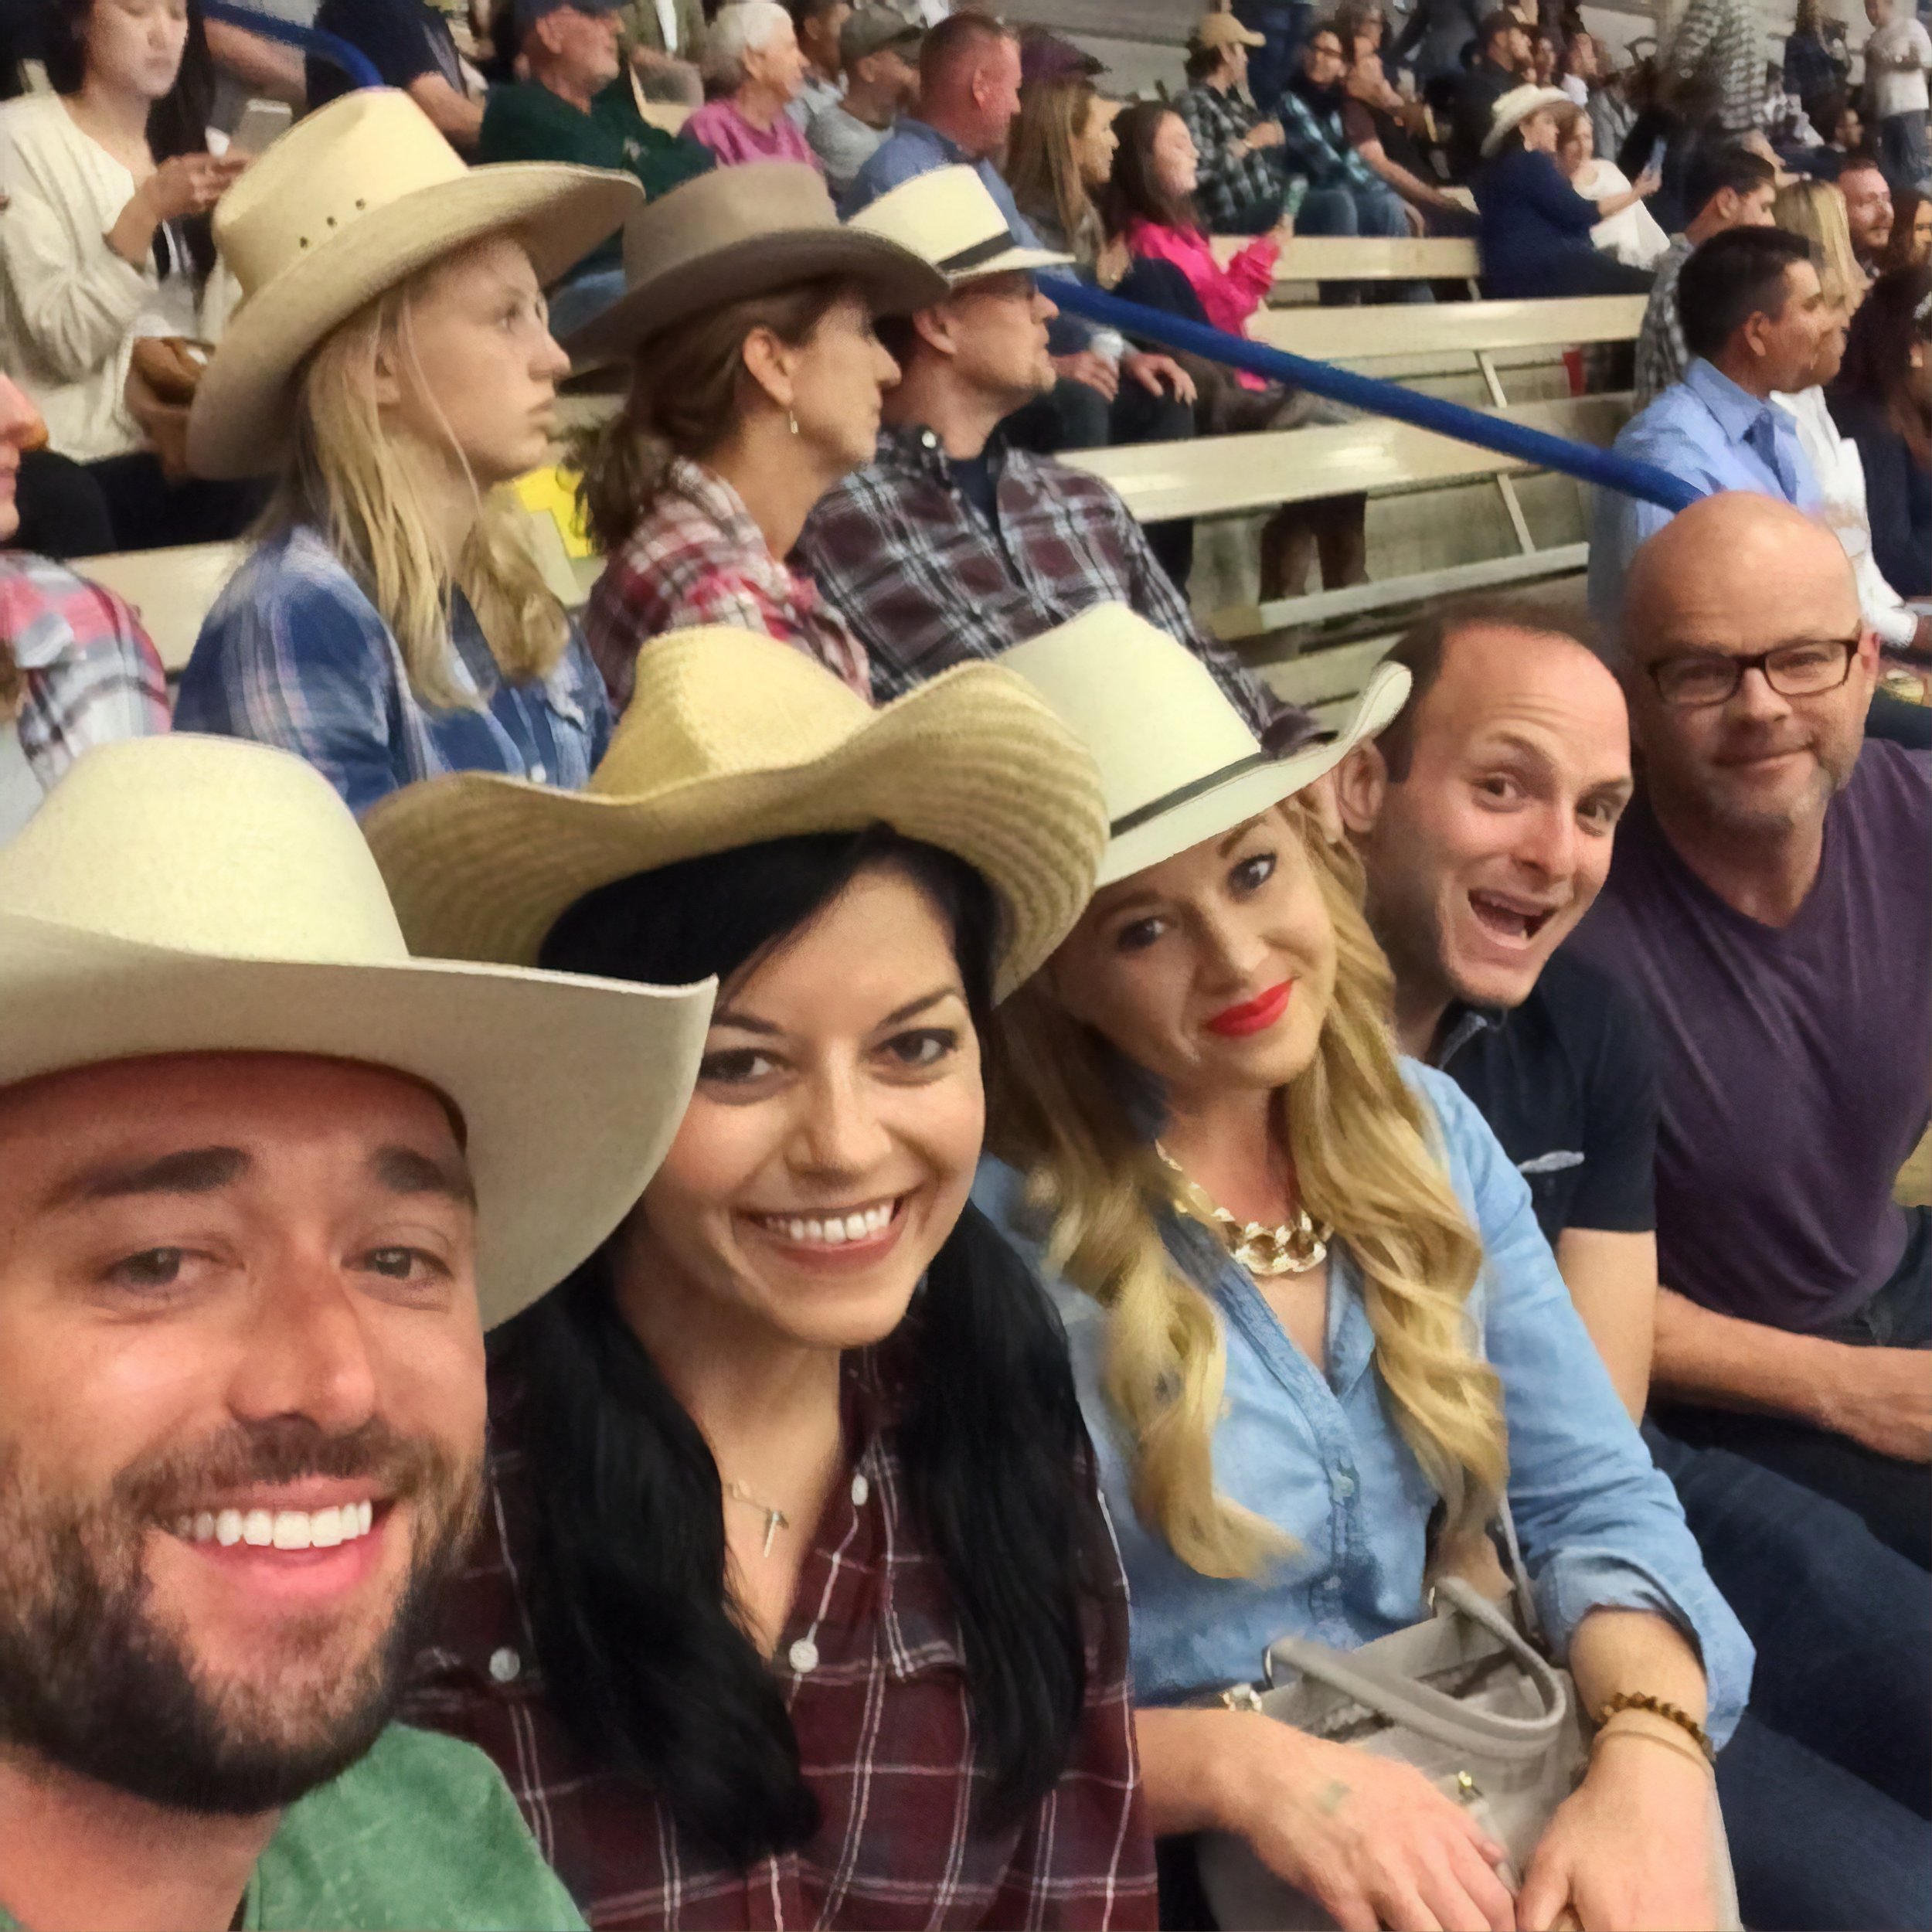  Yee haw, watching the rodeo 